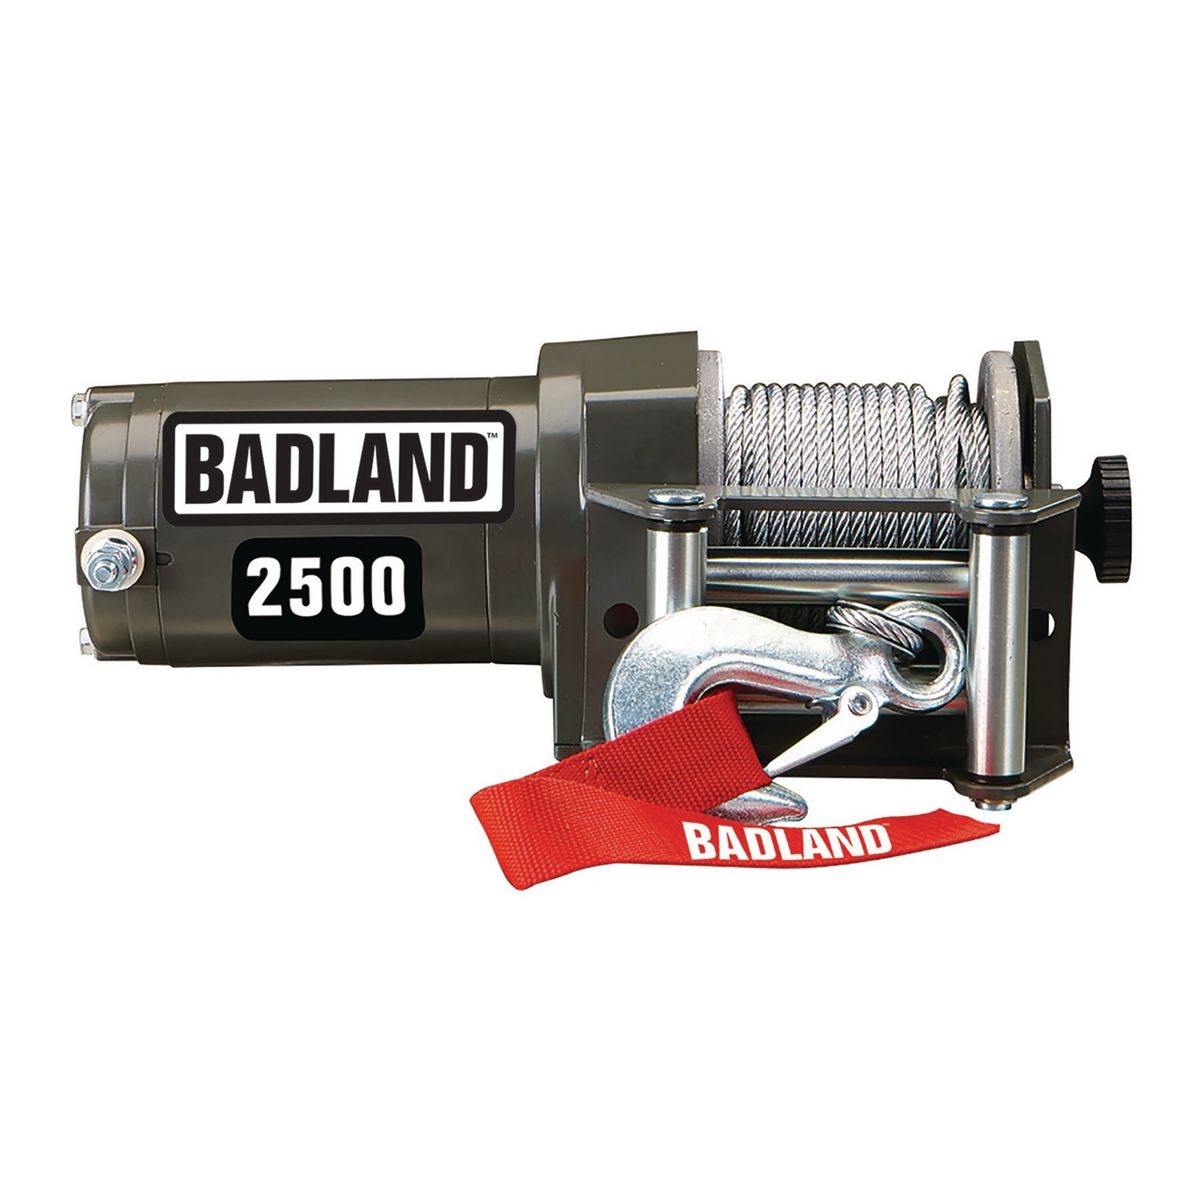 BADLAND 2500 lb. ATV/Utility Winch – Item 61840 / 61258 / 61297 / 63476 / 68146 – Harbor Freight How To Use Badland Winch Without Remote